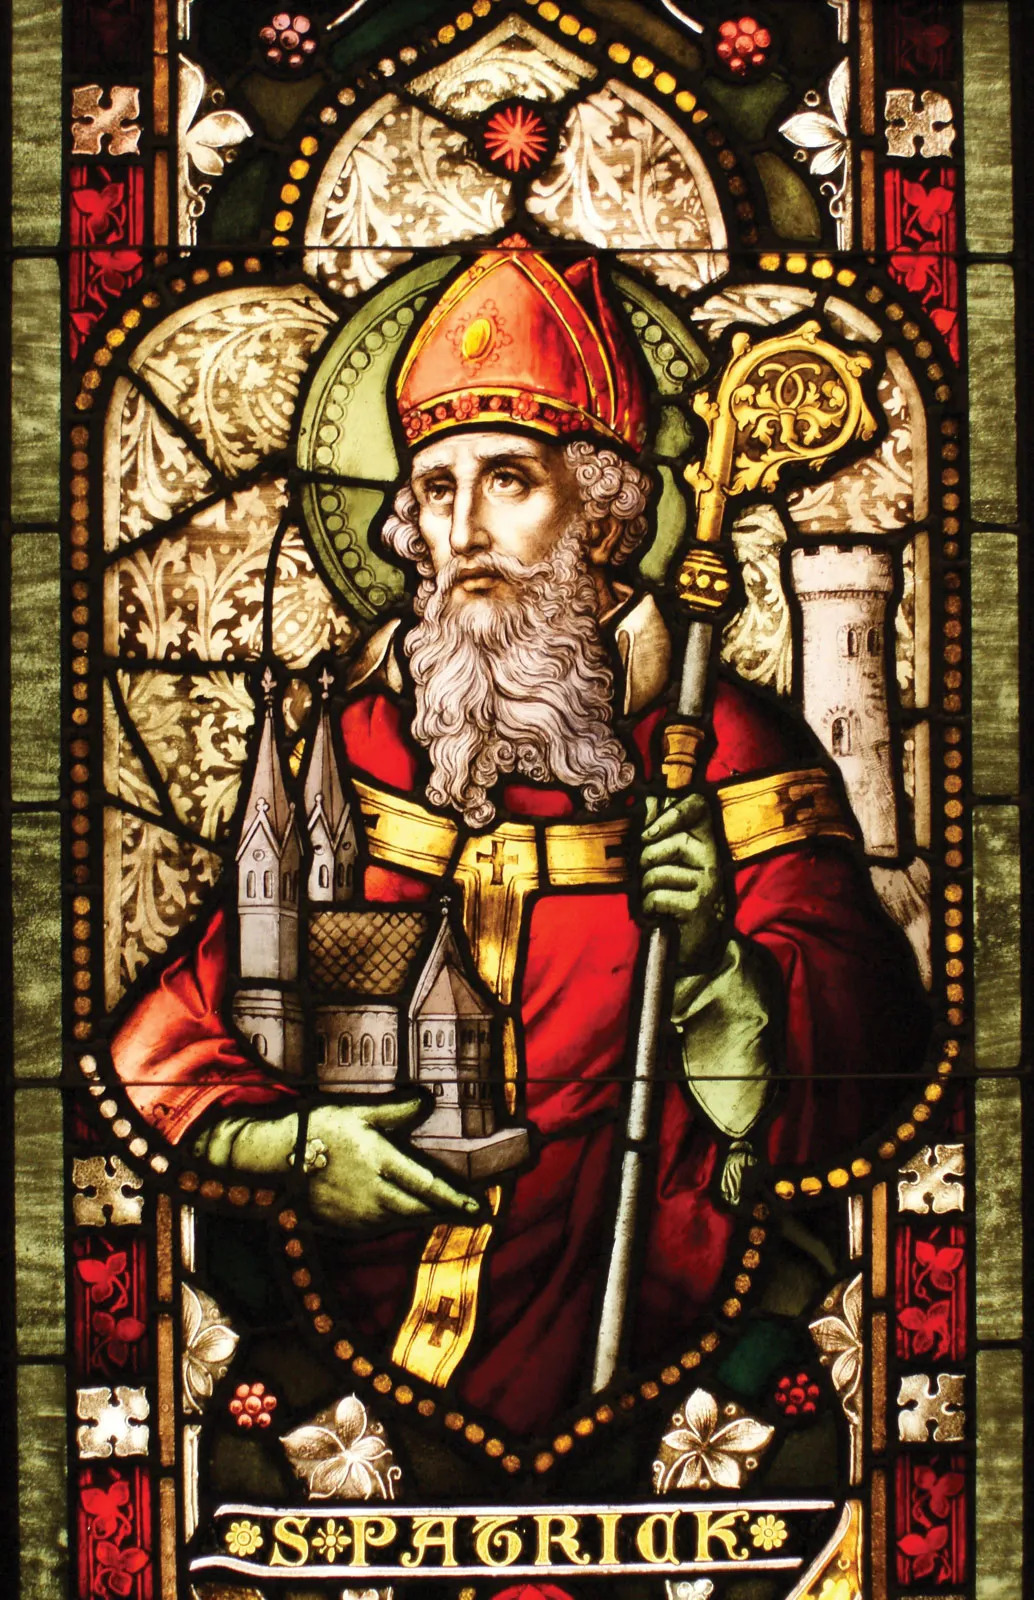 Stained Glass window of St. Patrick, Oakland, CA.